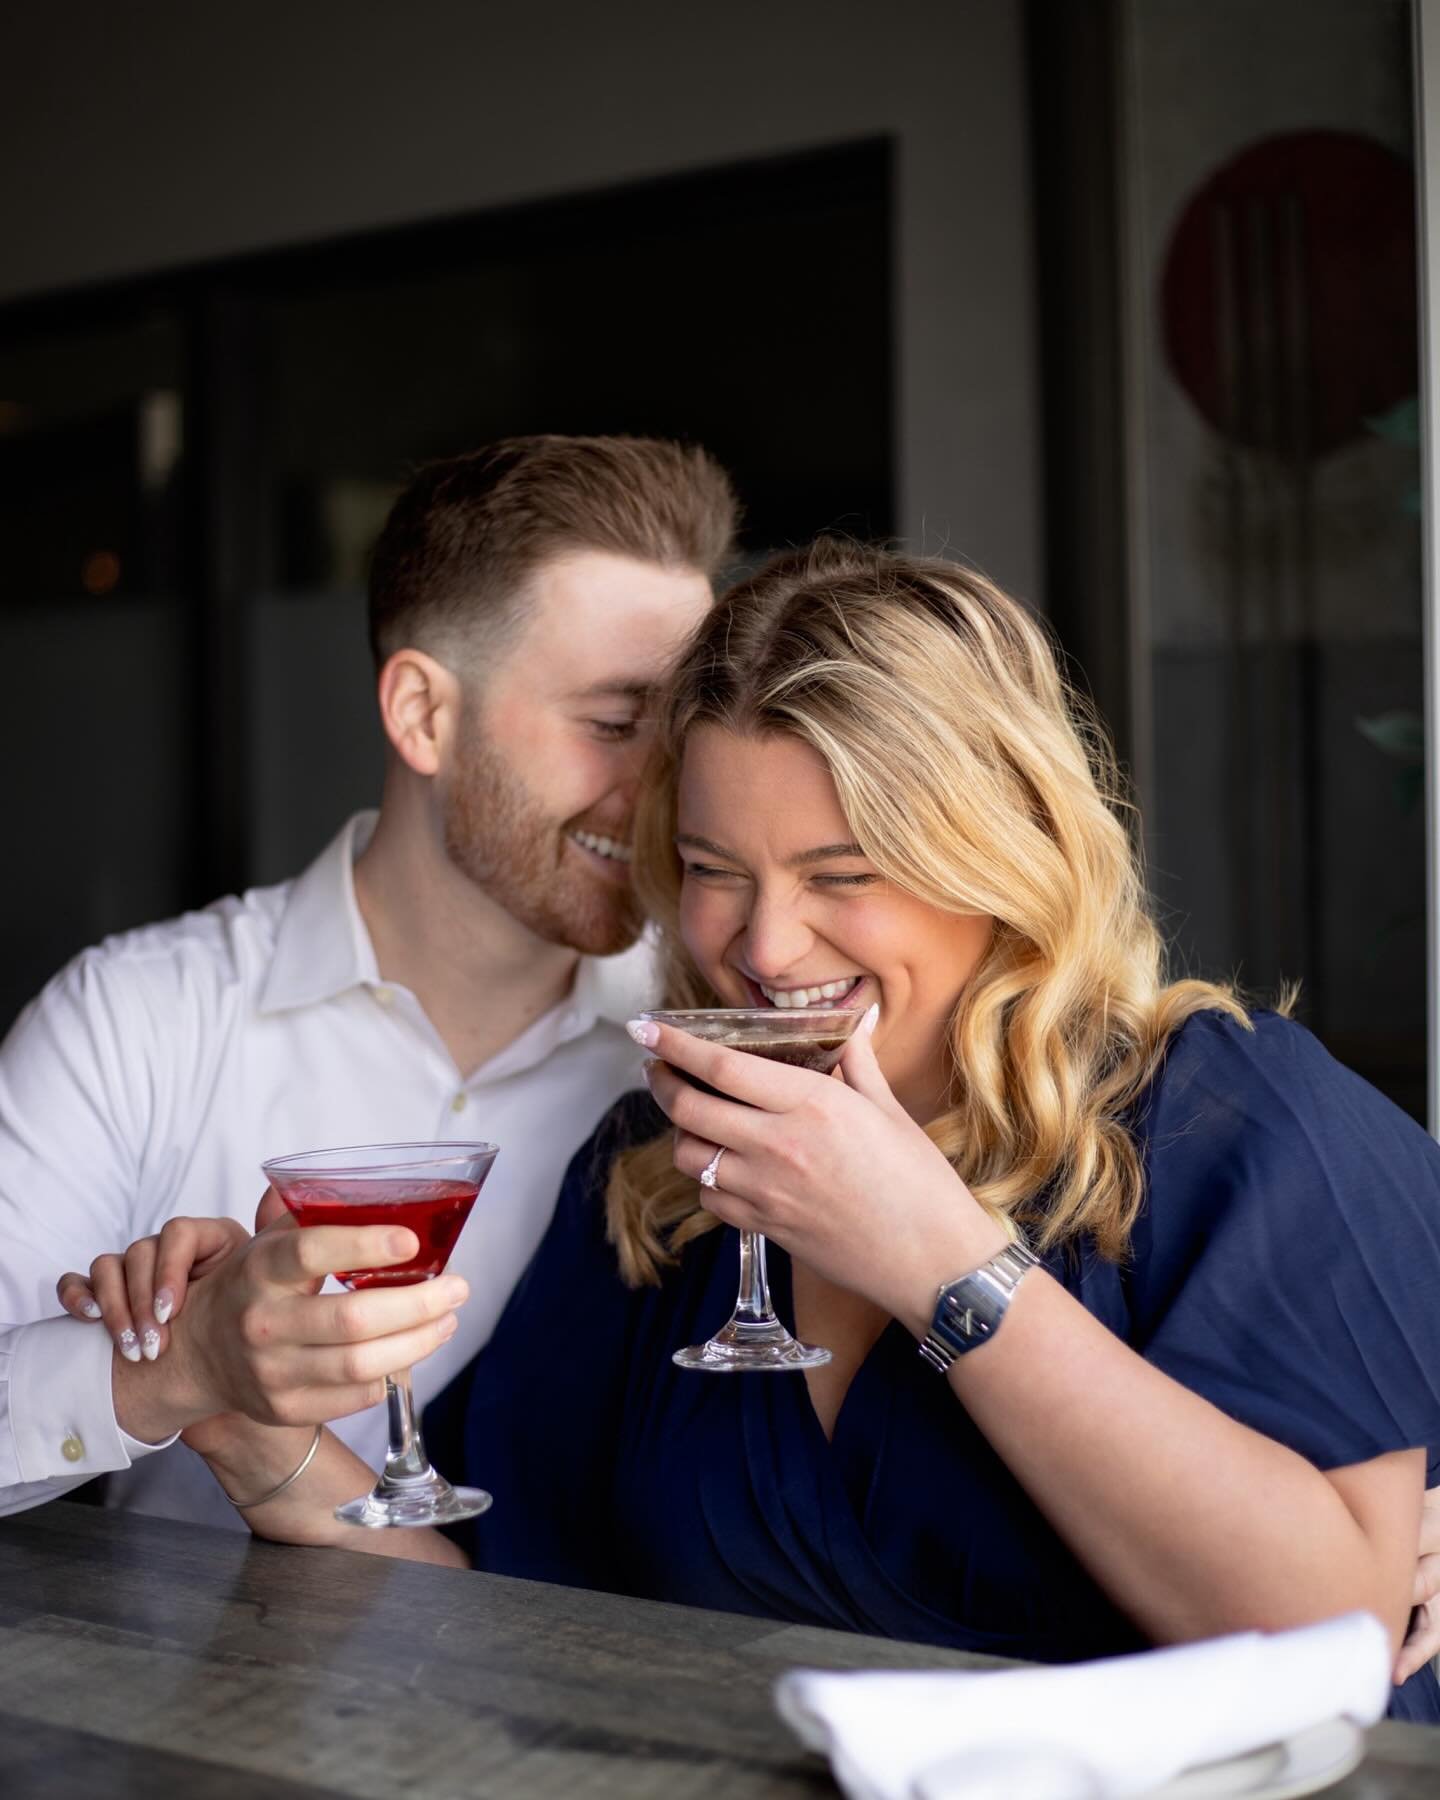 From martinis to ocean-side pizza, this downtown Plymouth engagement session was pure magic!

When Avery and I first connected she mentioned wanting to include pizza, I was sold! 

What is a fun idea you have for your session? 

#newenglandbride #maw